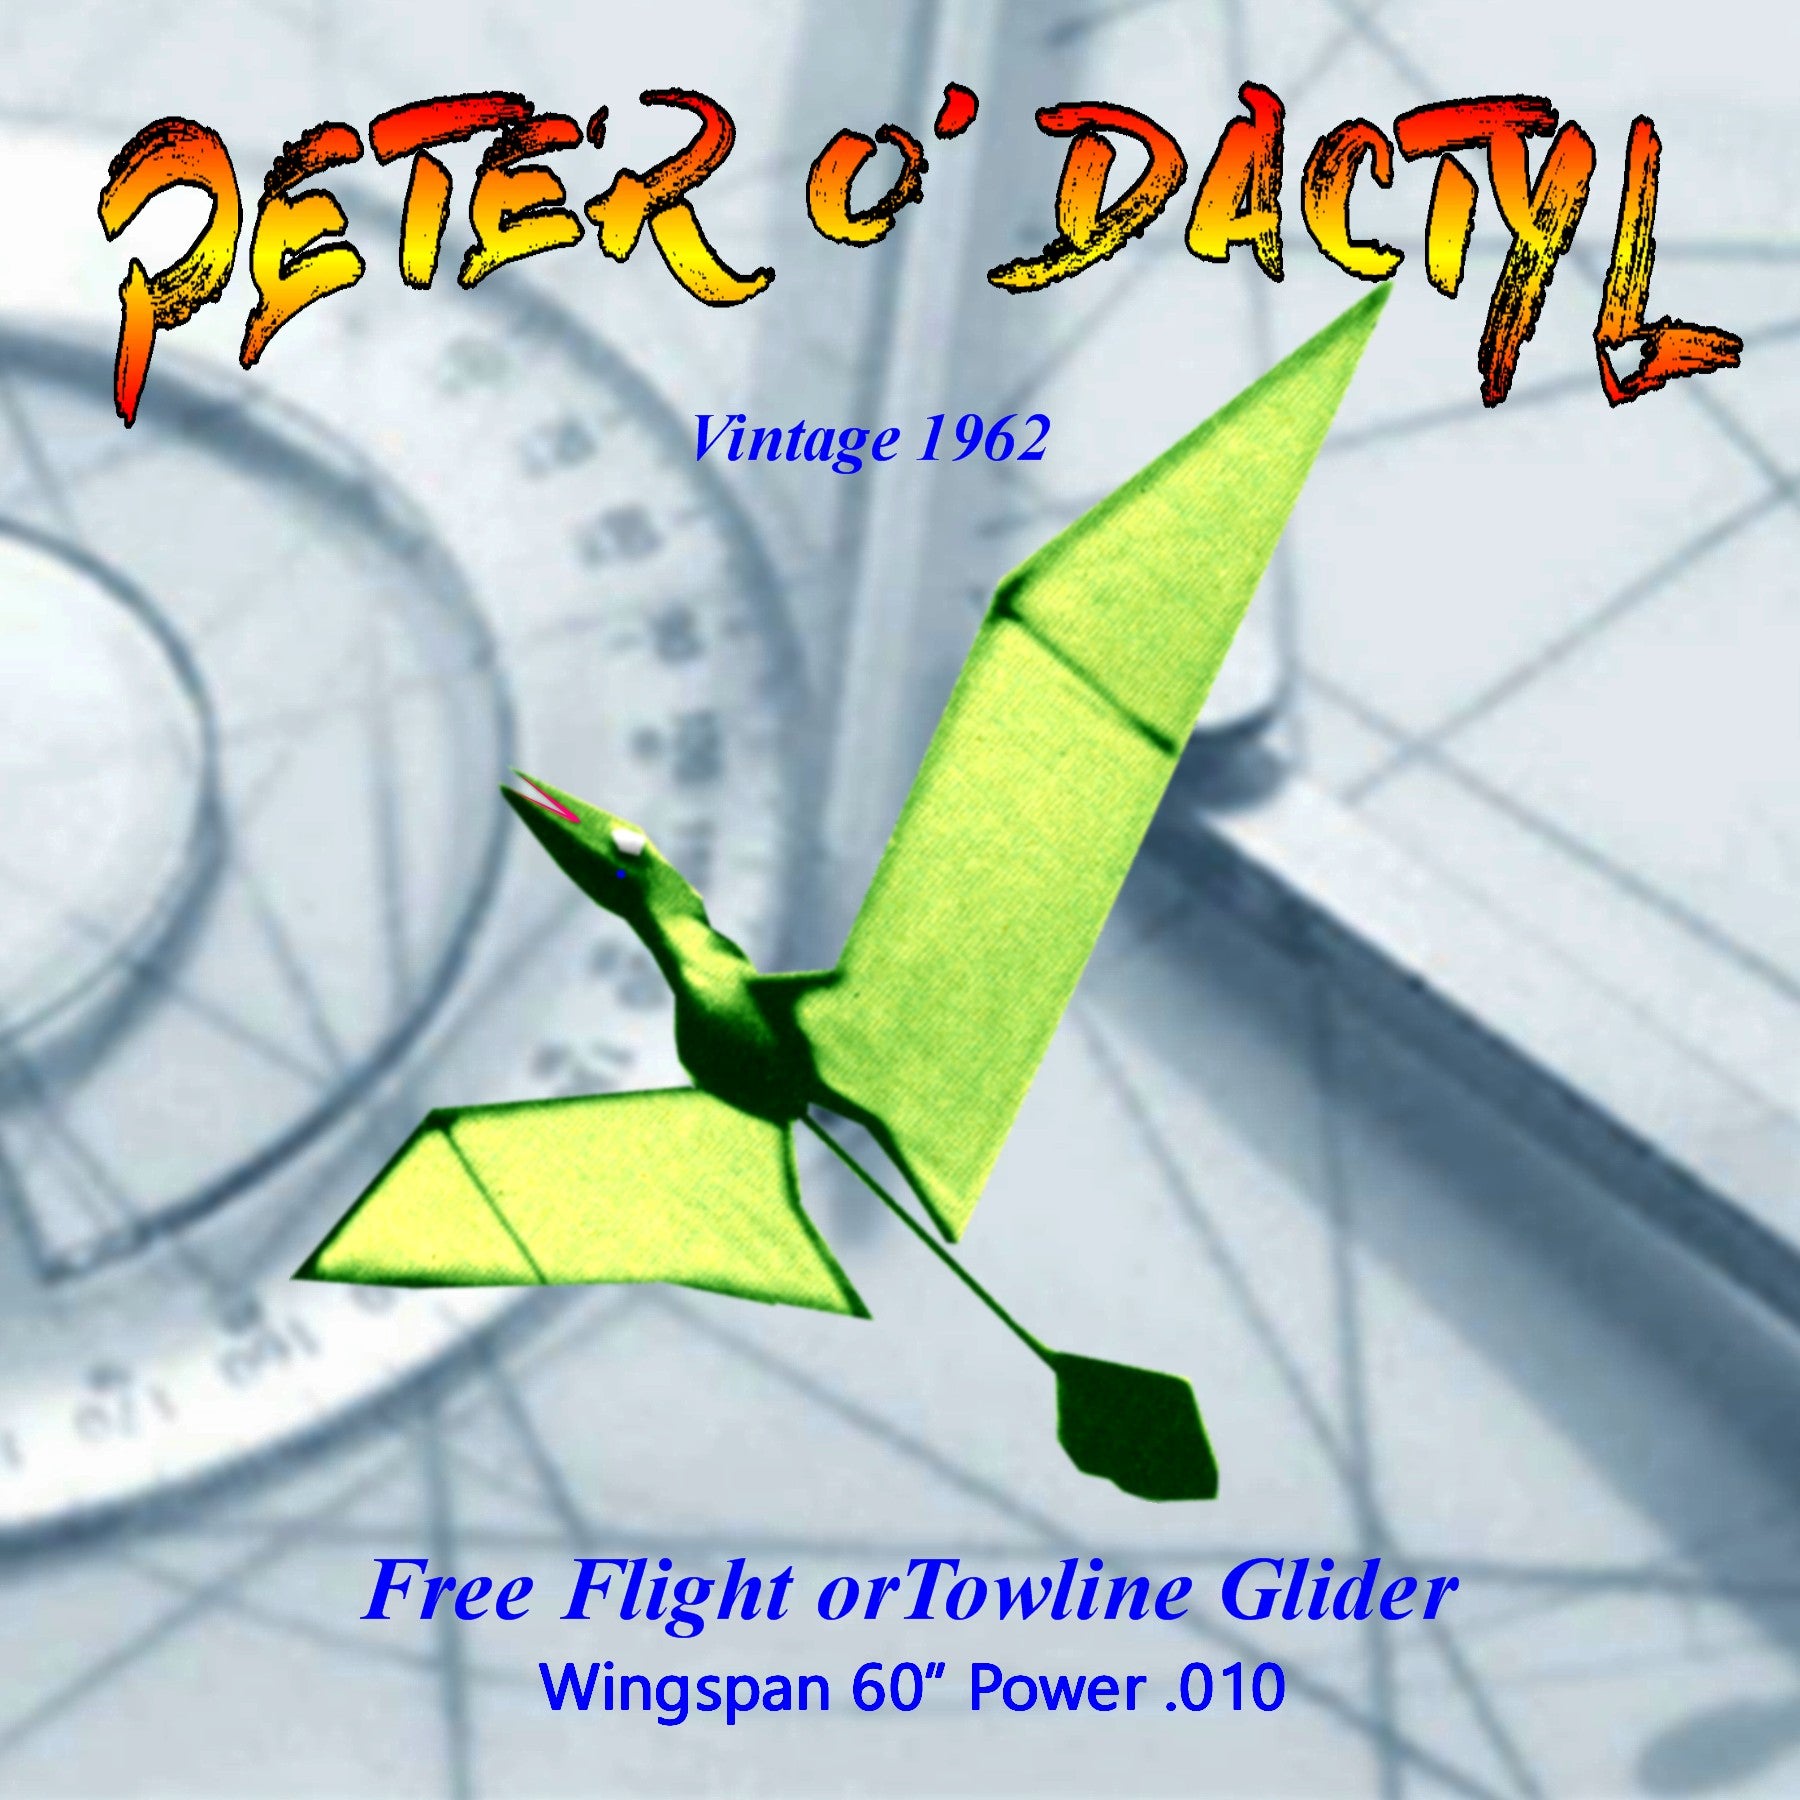 full size printed plan peter o'dactyl free-flight reptile .010 or towline glider